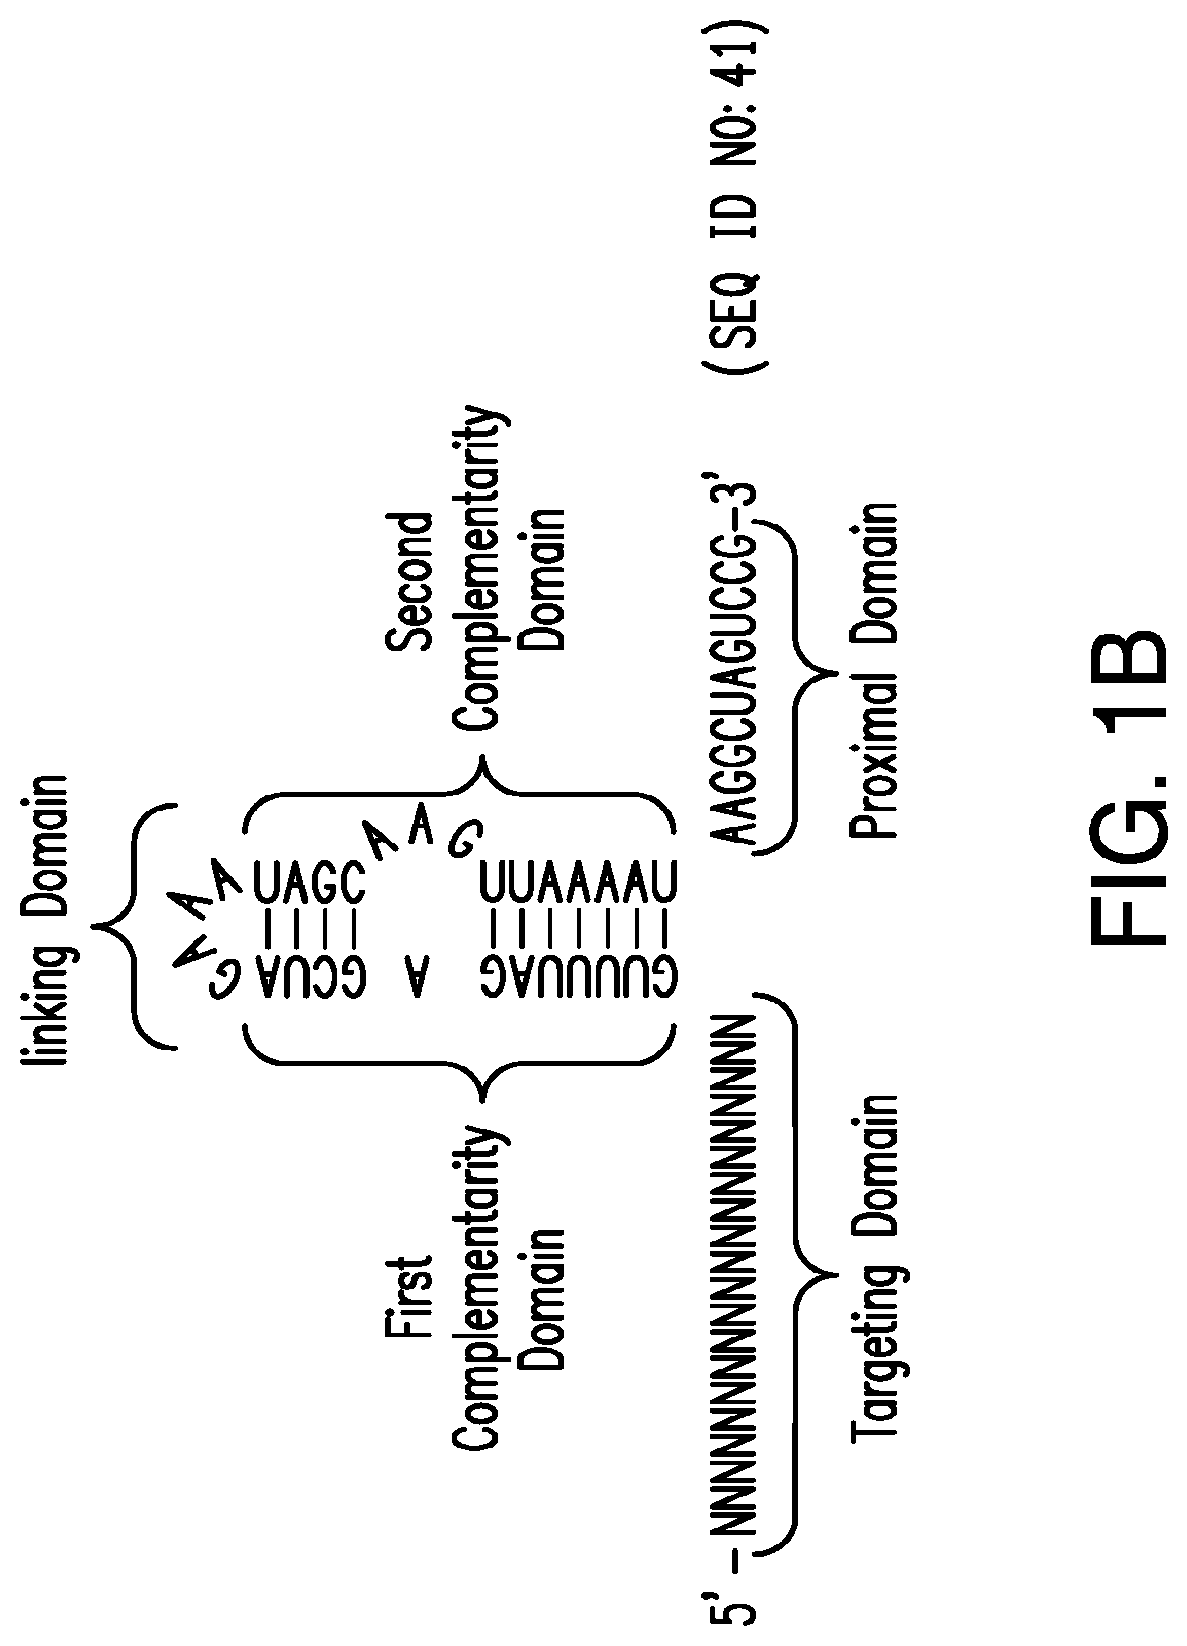 CRISPR/Cas-related methods and compositions for treating herpes simplex virus